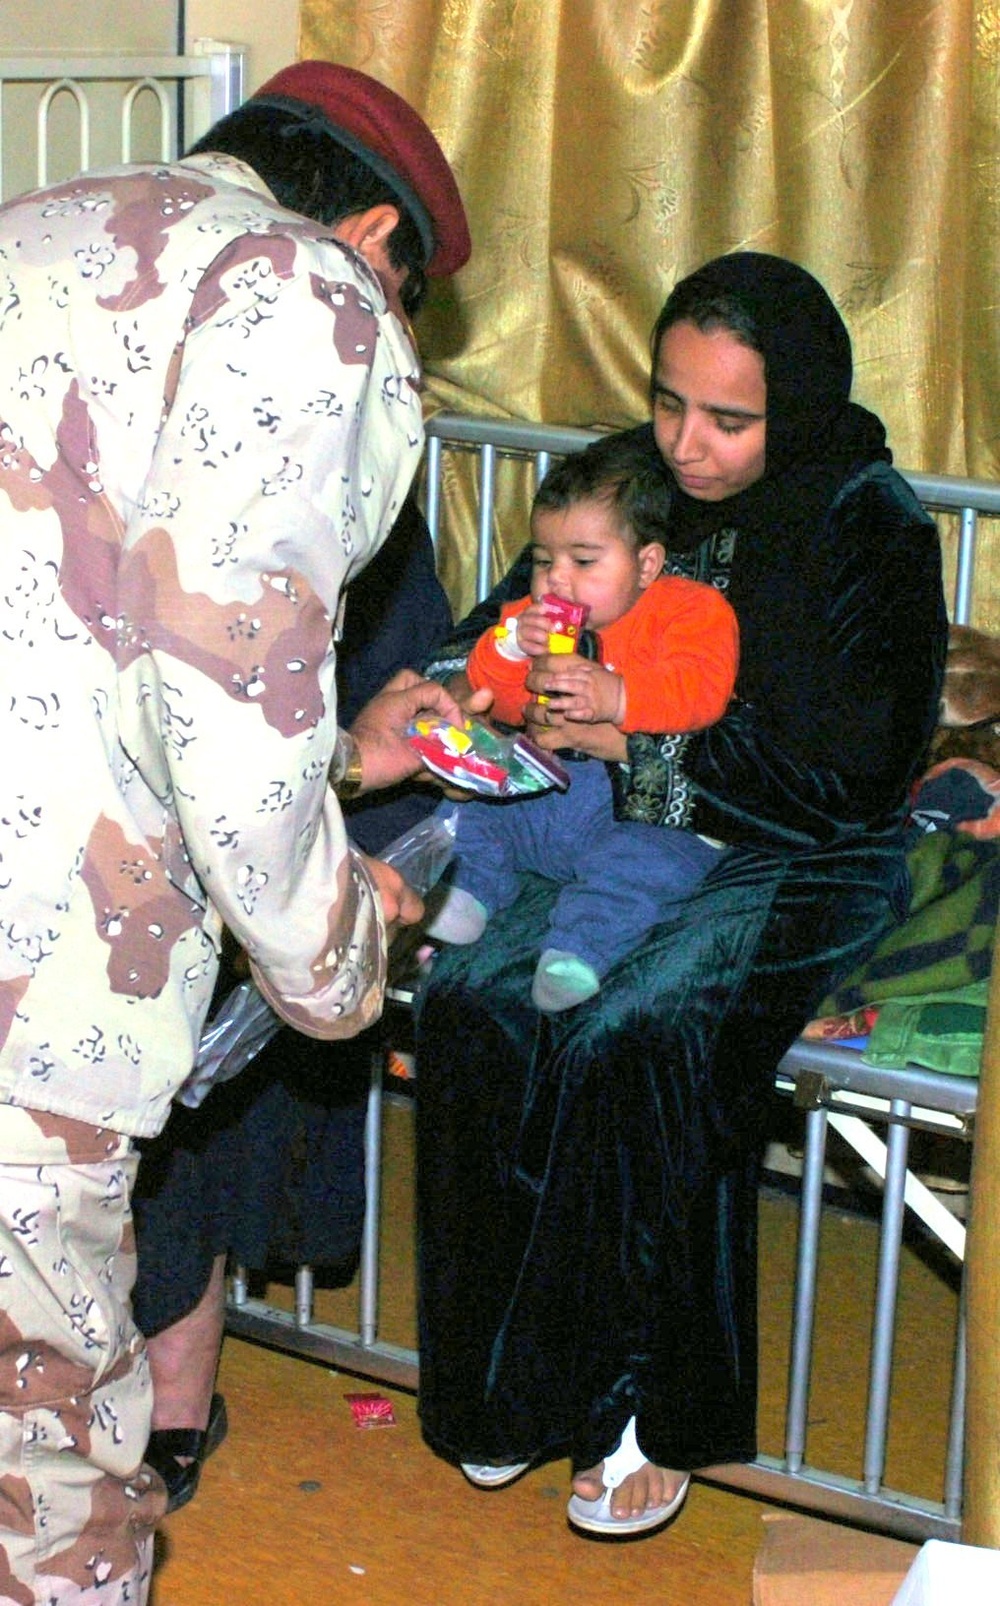 An Iraqi Army officer hands the mother of a sick Iraqi girl a bag of snacks